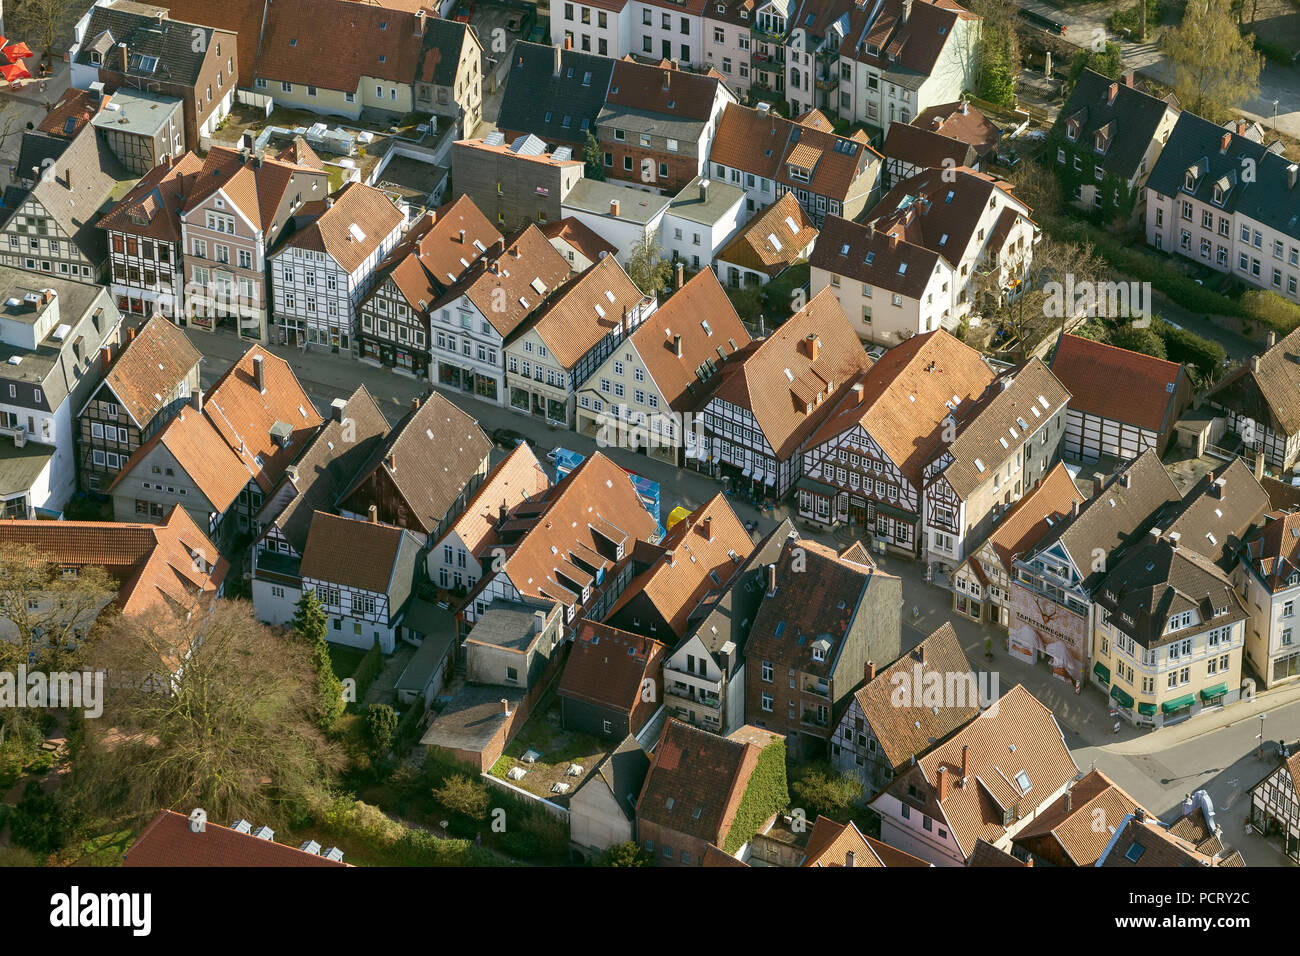 Krummestraße with half-timbered houses, aerial photograph of Detmold Stock Photo